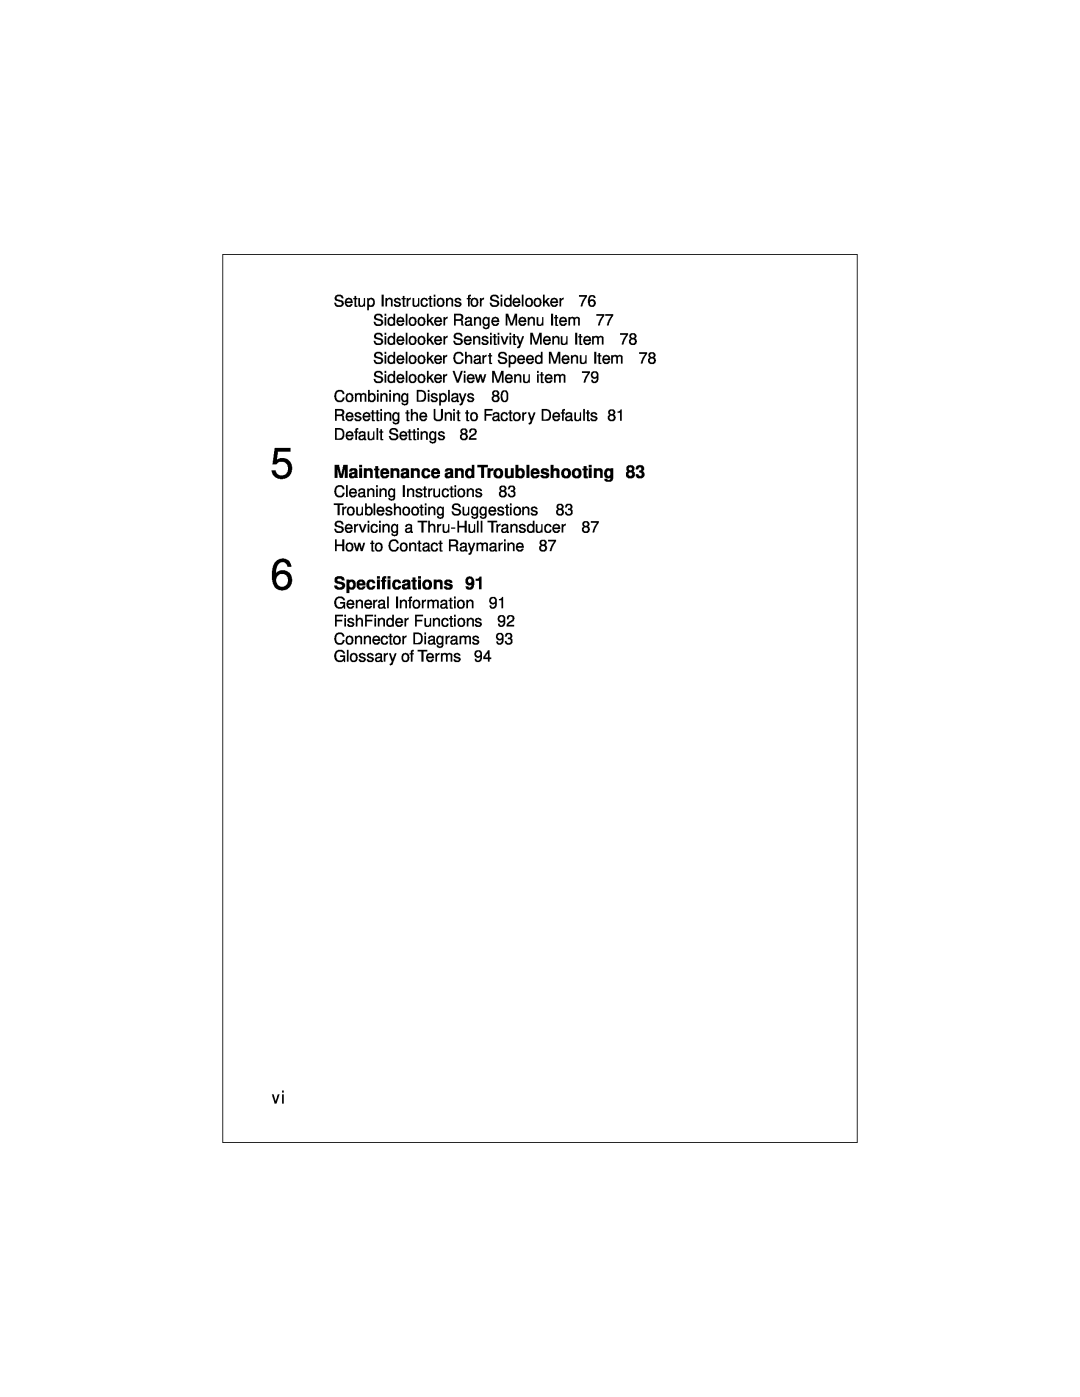 Raymarine L470 instruction manual Maintenance and Troubleshooting, Specifications 